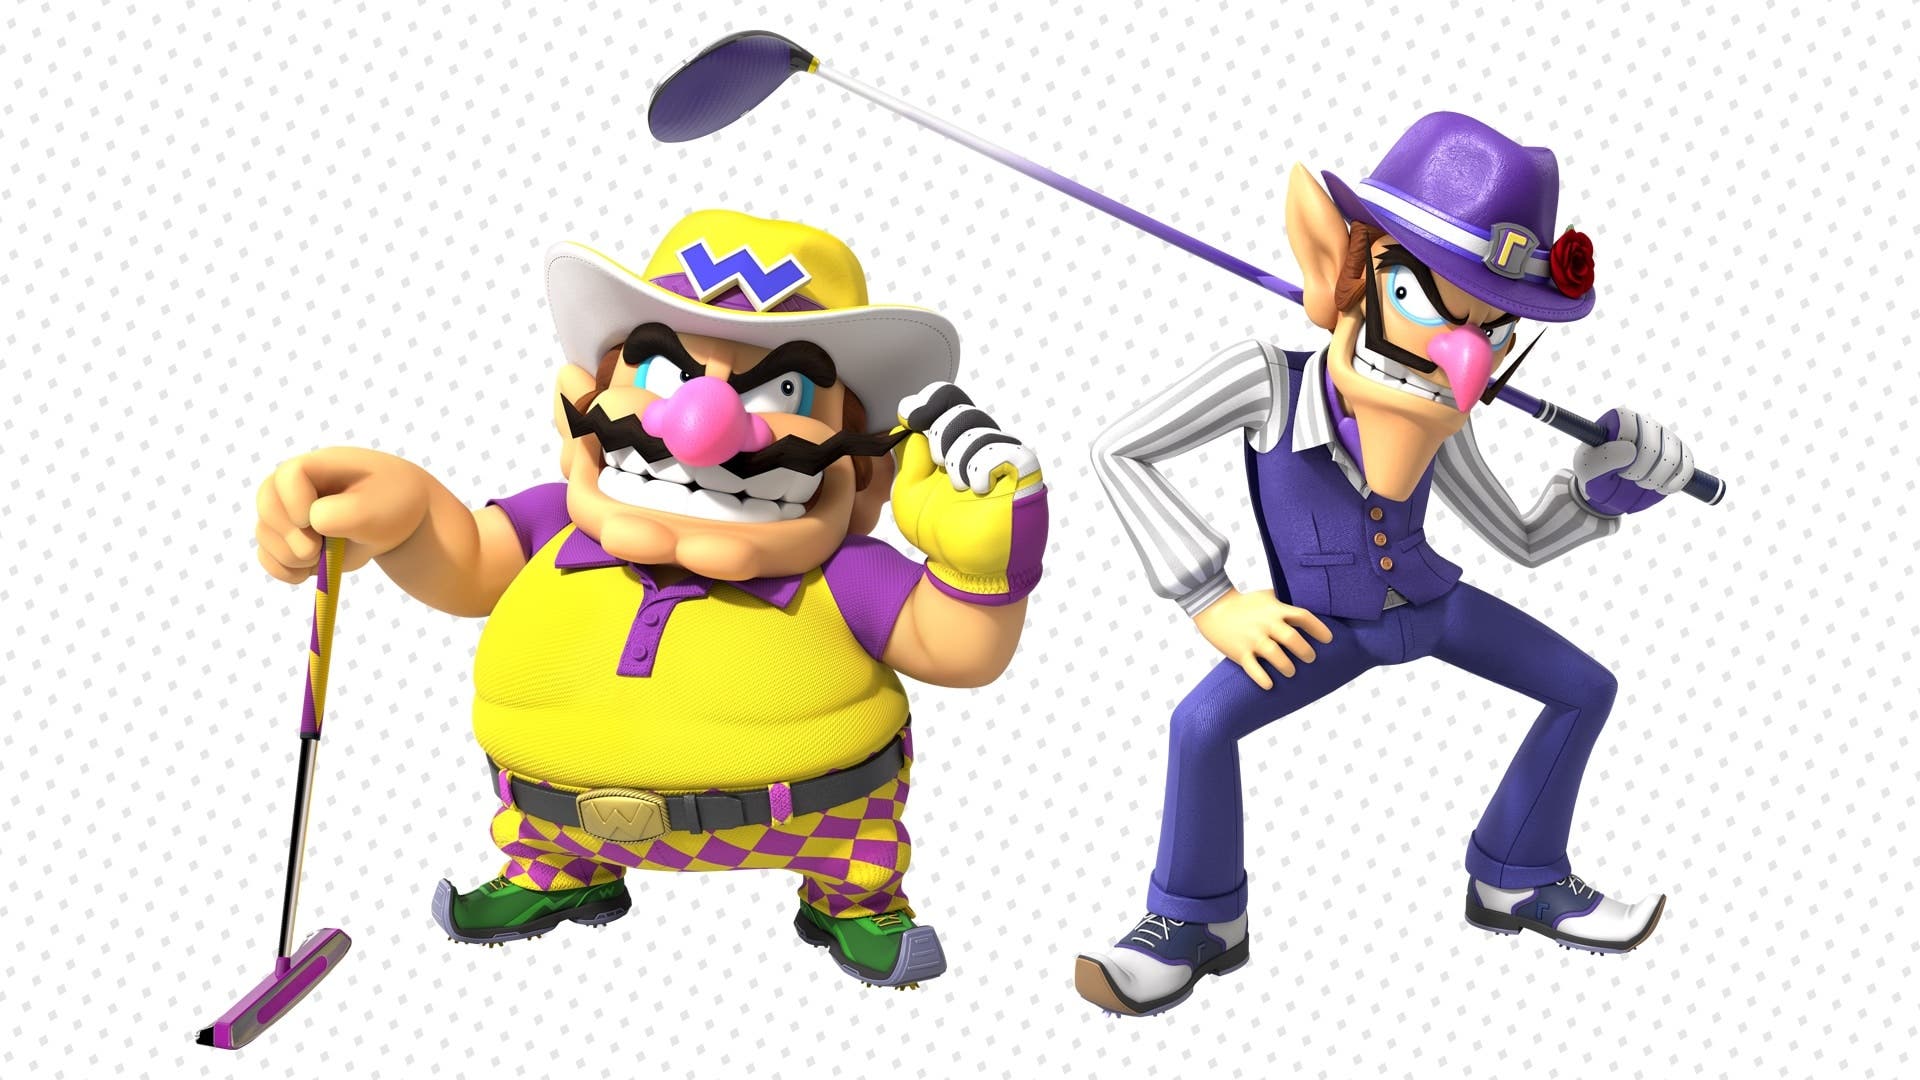 Love Wario's outfit, but damn, Waluigi's costume is even better! 